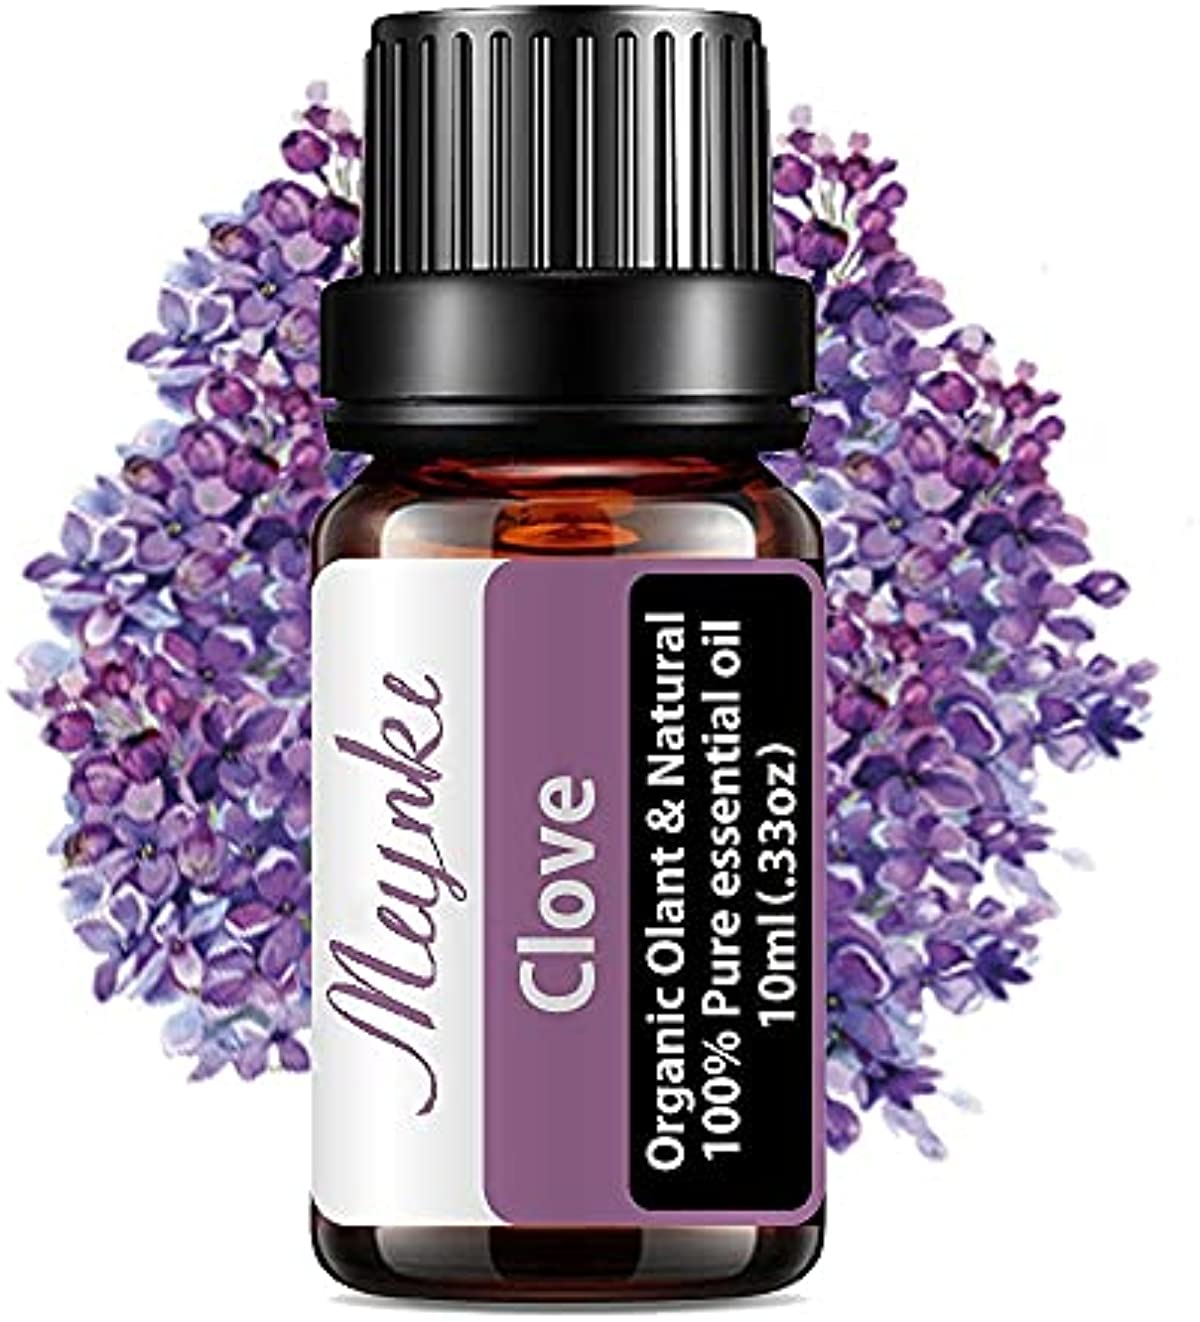 Clove Essential Oil for Diffuser for Home Office Bedroom Bathroom Study Living Yoga Spa Large Room Outdoors -10ml